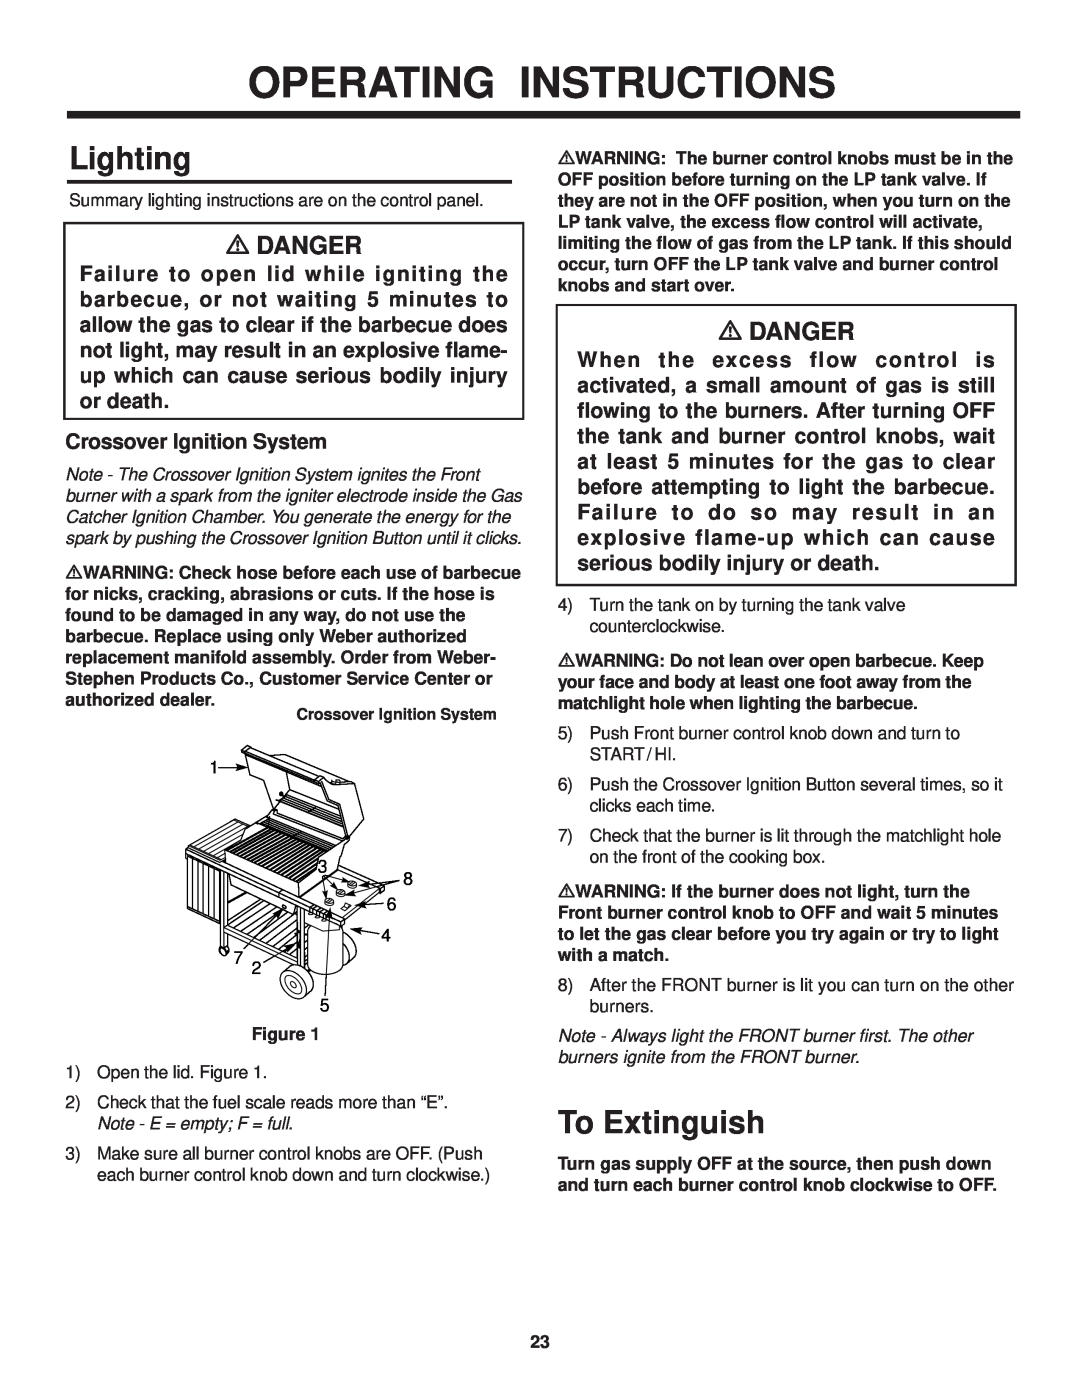 Weber 1000 LX Series owner manual Operating Instructions, Lighting, To Extinguish, mDANGER, Crossover Ignition System 